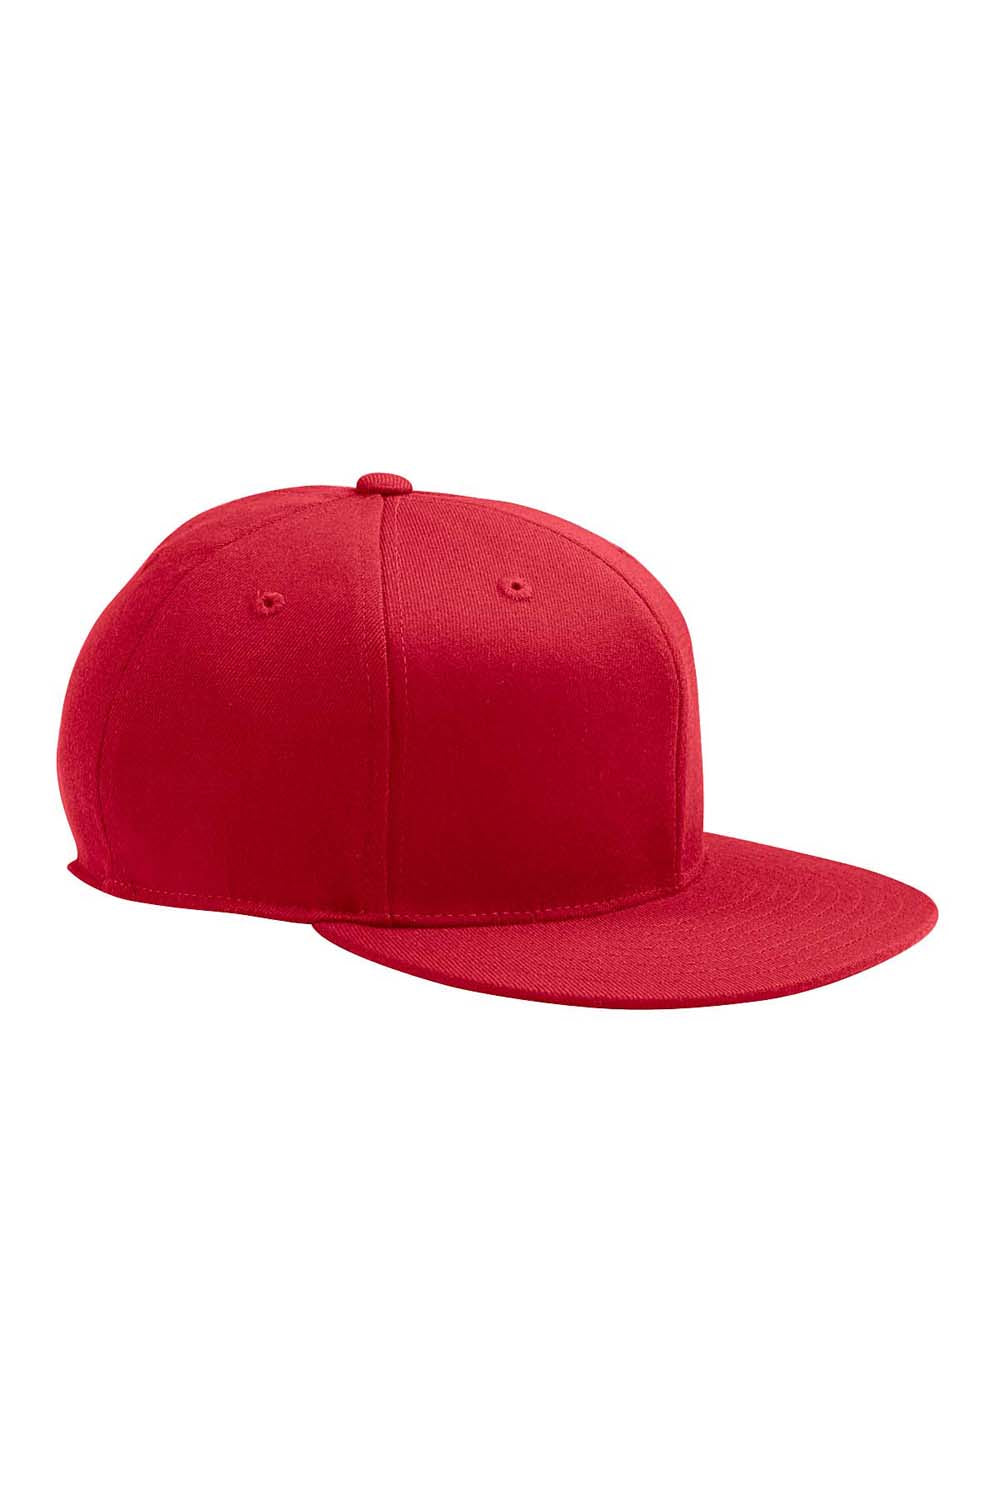 Flexfit 6210 Mens Fitted Stretch Fit Hat Red Front